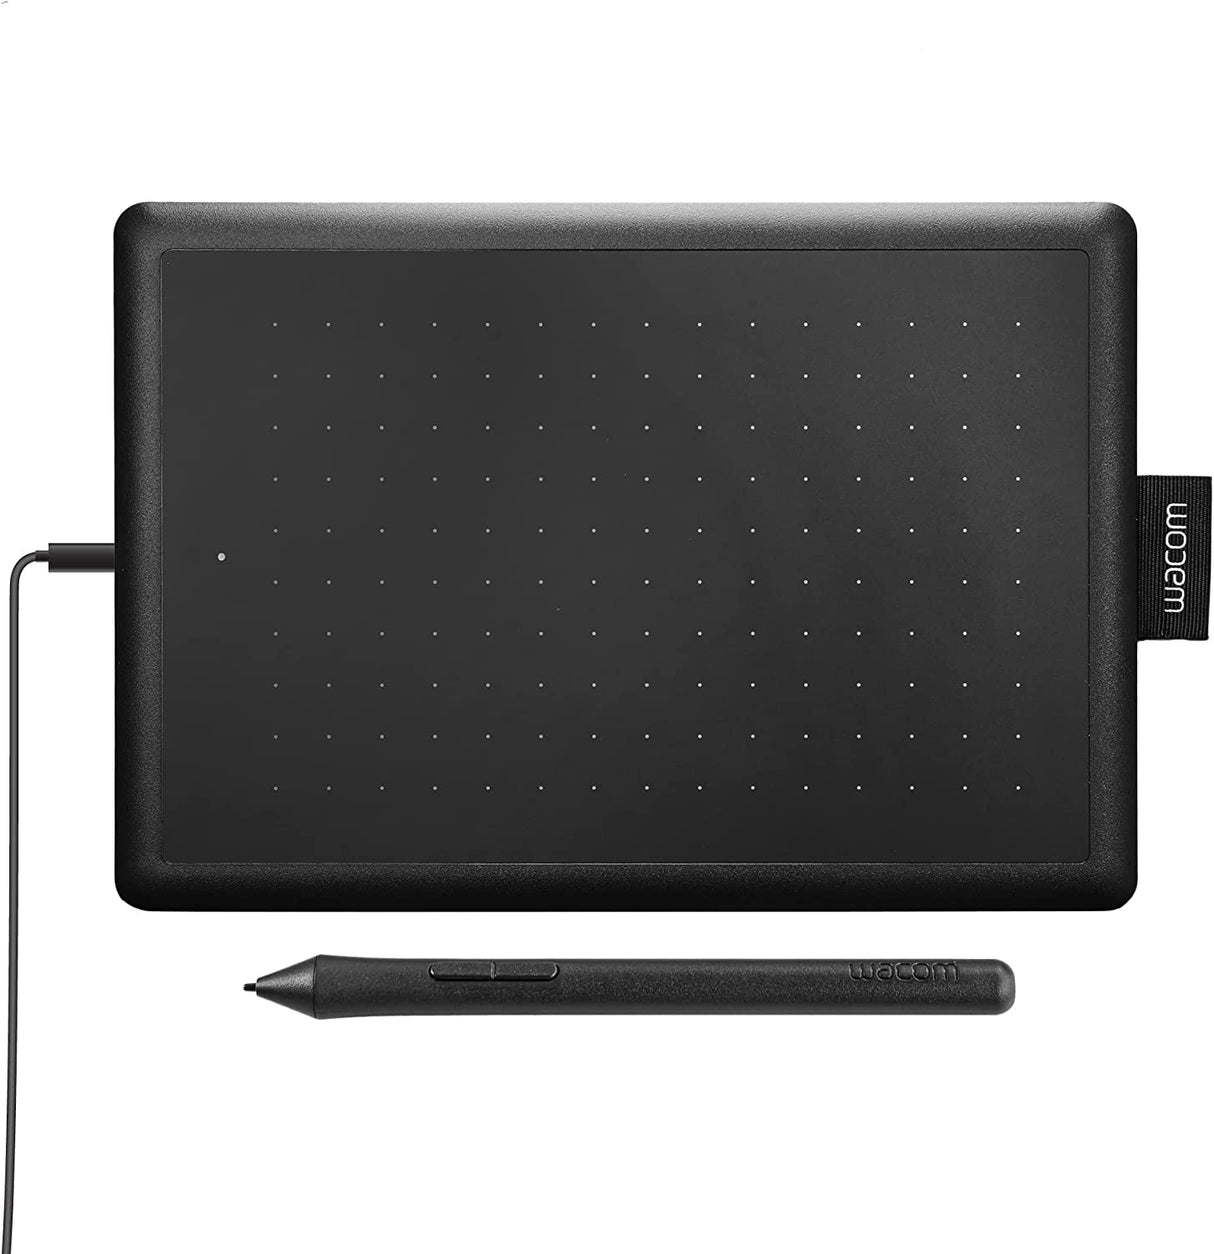 Wacom Intuos Small Bluetooth Graphics Drawing Tablet - Black &amp; Wacom Small Graphics Drawing Tablet 8.3 x 5.7 Inches, Portable Versatile for Students and Creators Black Small Wireless Tablet + Tablet 8.3 x 5.7 Inches